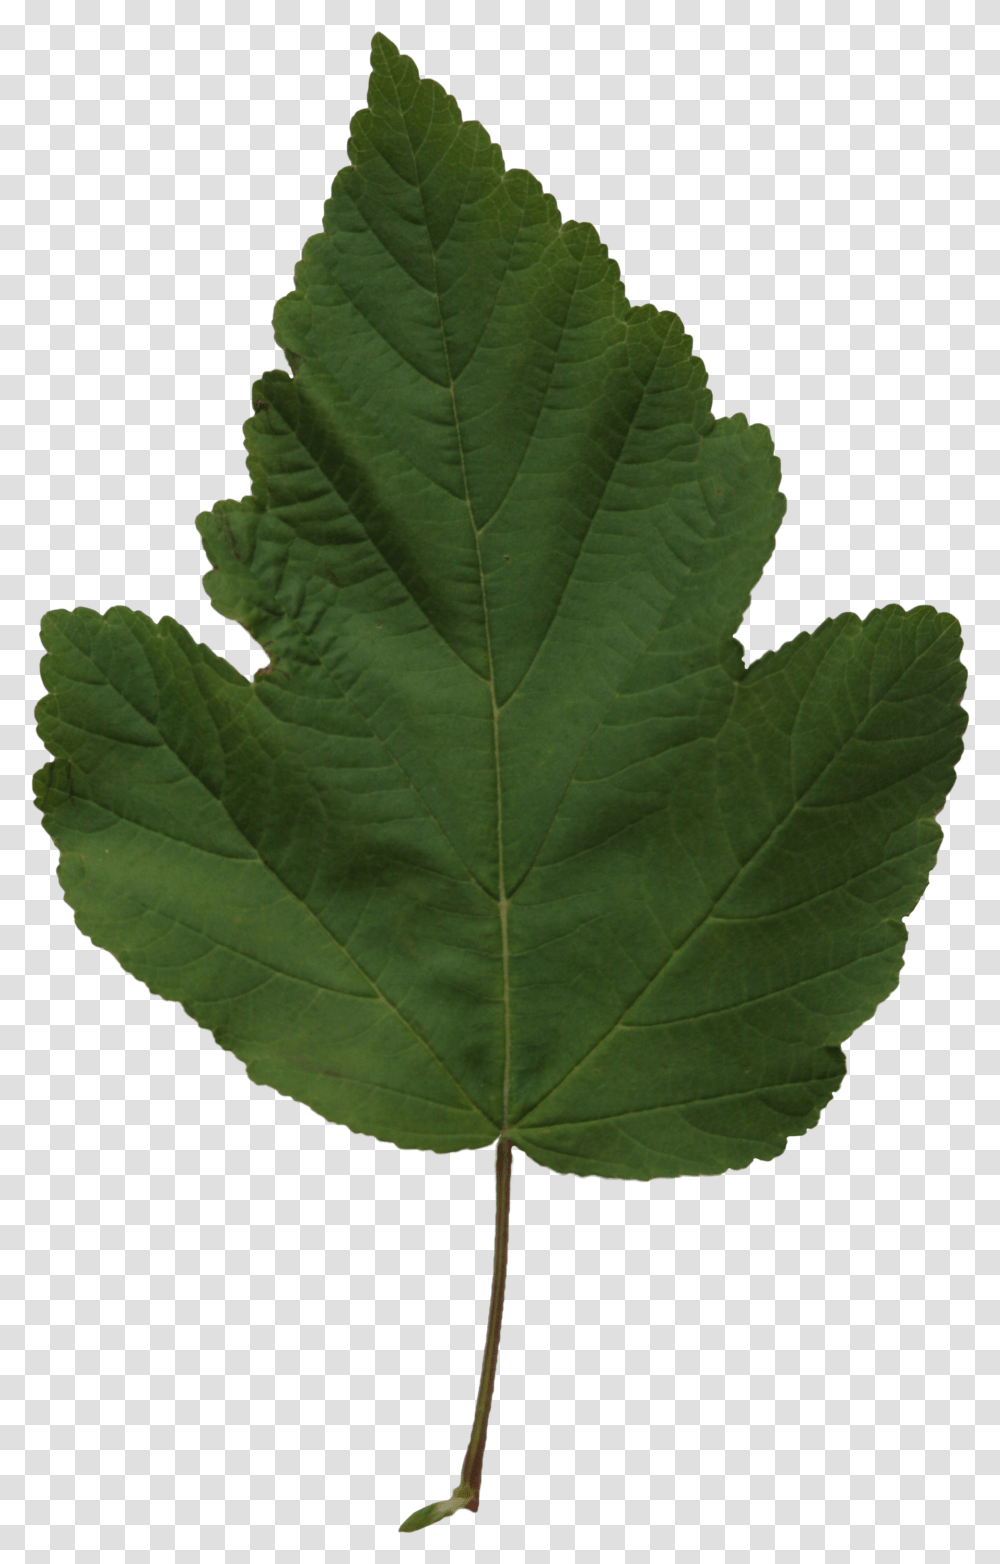 Poplar Leaf Texture Free Cut Out People Trees And Leaves Cottonwood, Plant, Maple Leaf, Oak, Sycamore Transparent Png